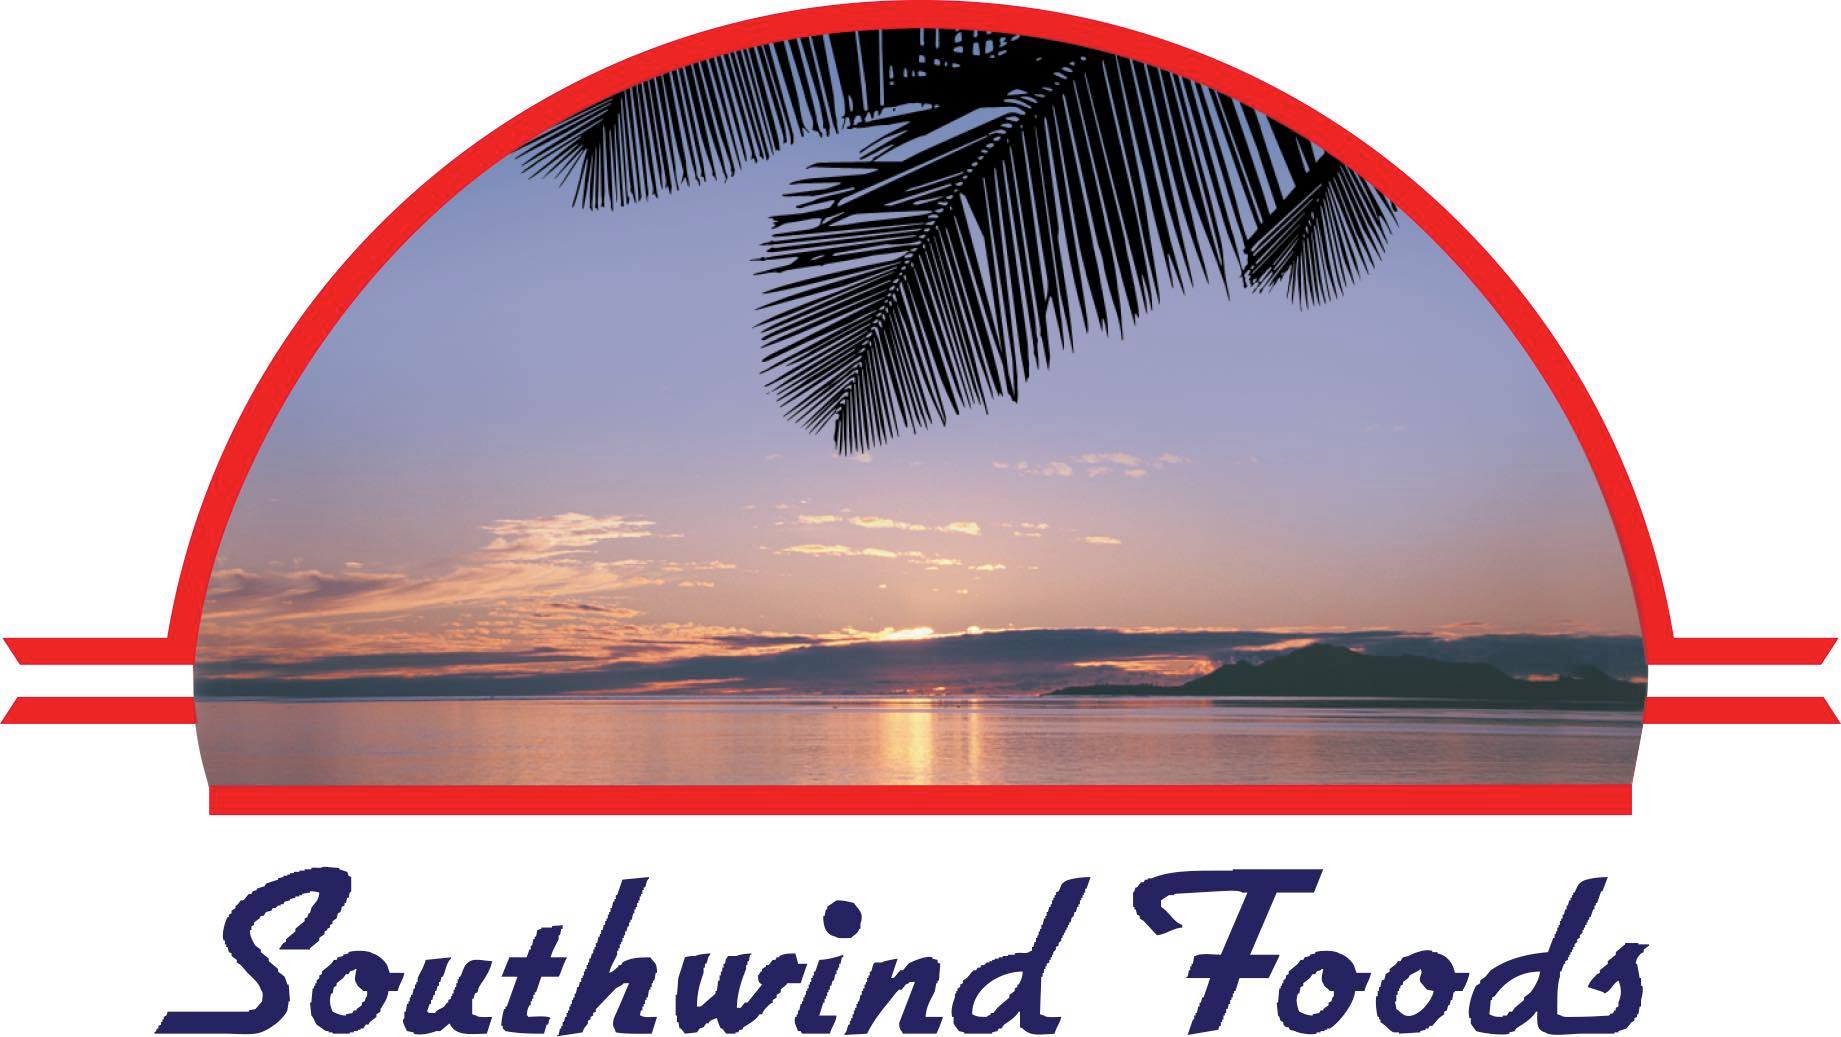 Food Distribution Process Automation: Southwind Foods Success Story